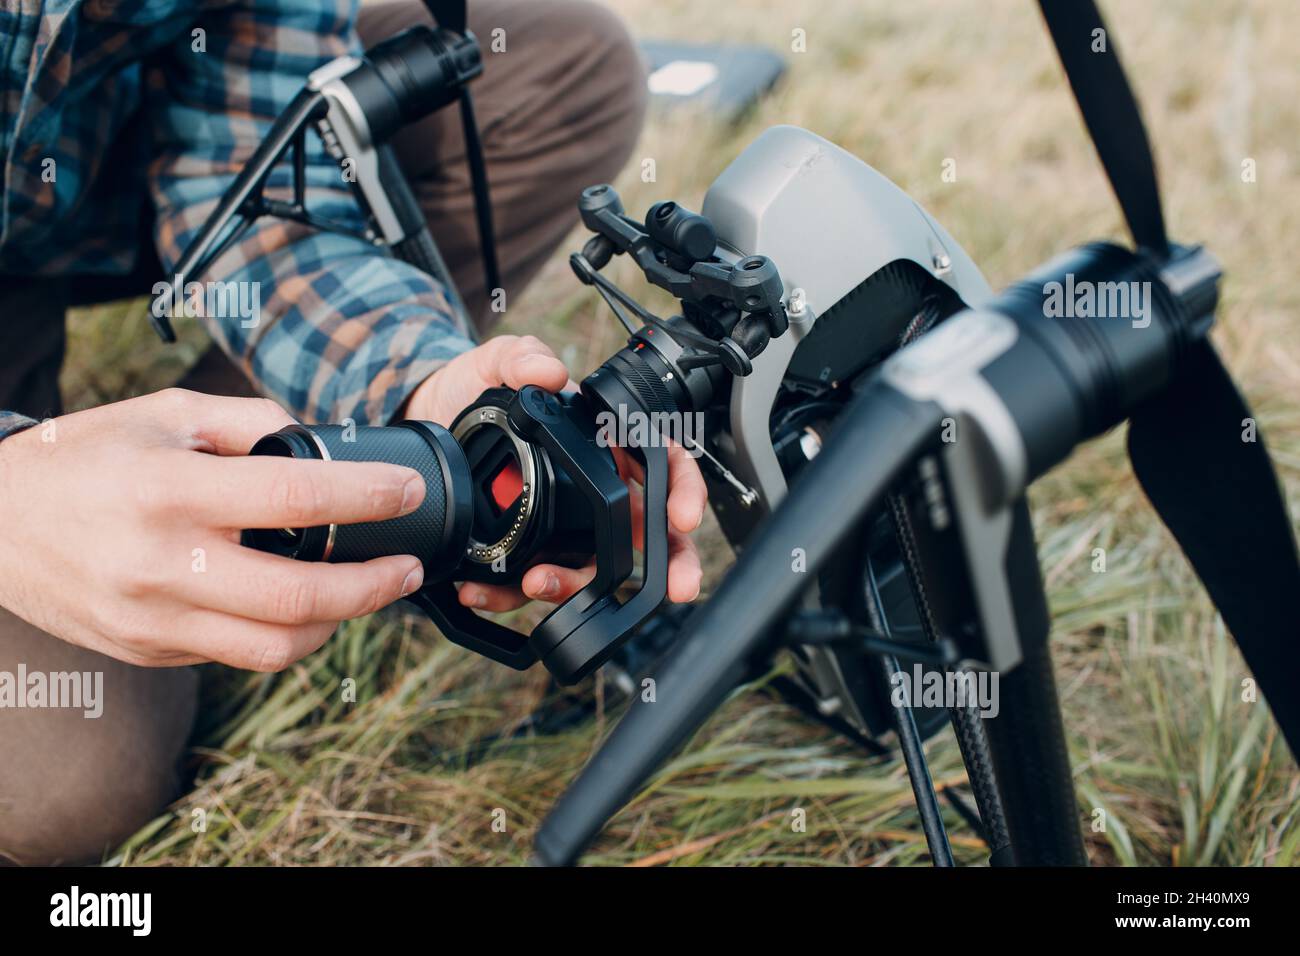 Man pilot checking quadcopter drone before aerial flight and filming. Stock Photo